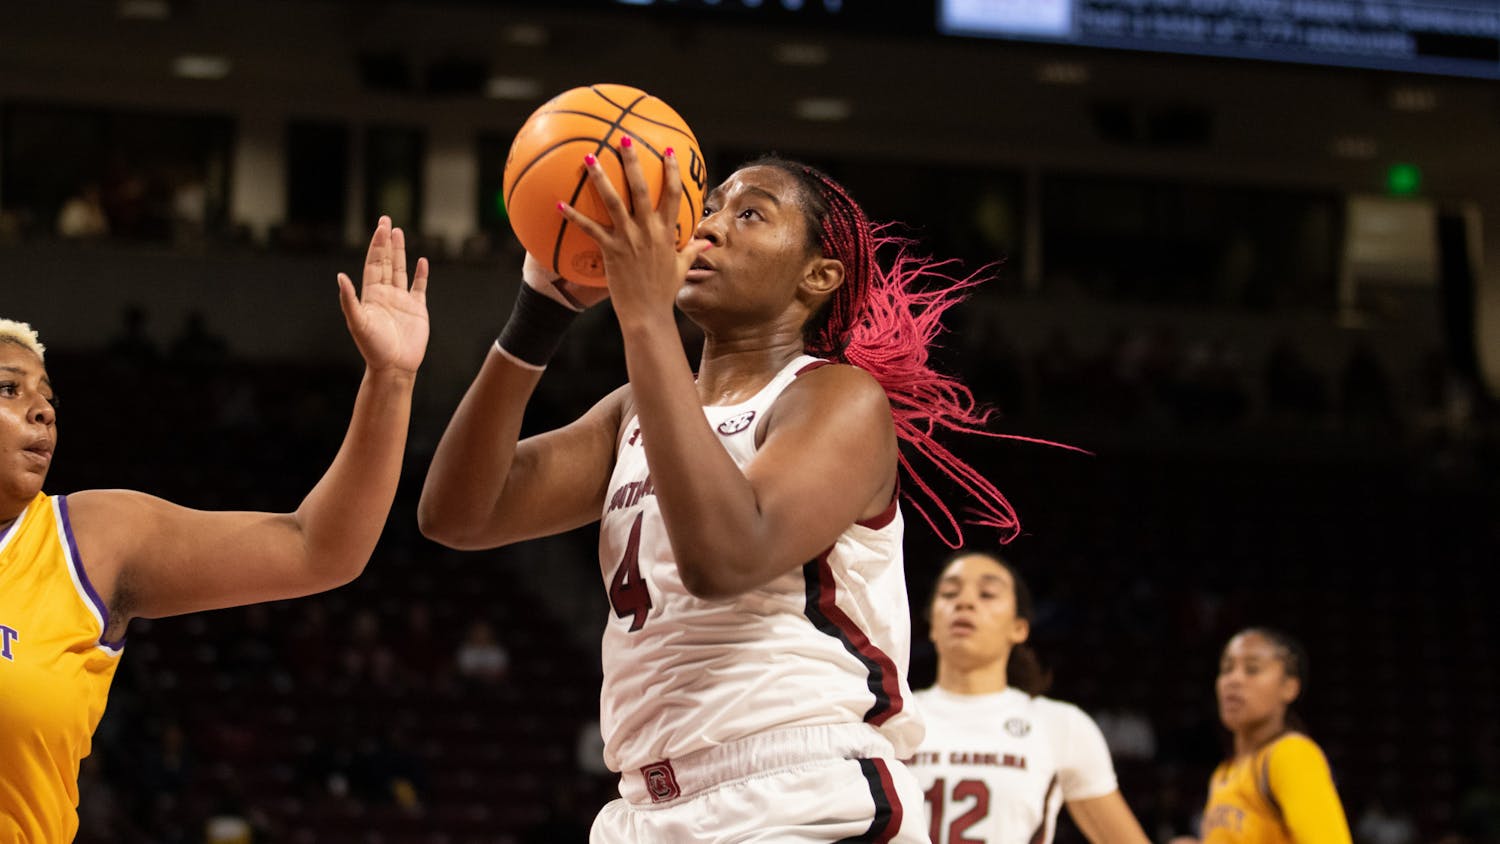 In an exhibition match against the Benedict Tigers on Oct. 31, 2022, the Gamecock women‘s basketball team dominated in an impressive matchup before its upcoming season. South Carolina beat Benedict 123-32 in a game that took place in front of a small crowd in Colonial Life Arena in Columbia, S.C.&nbsp;